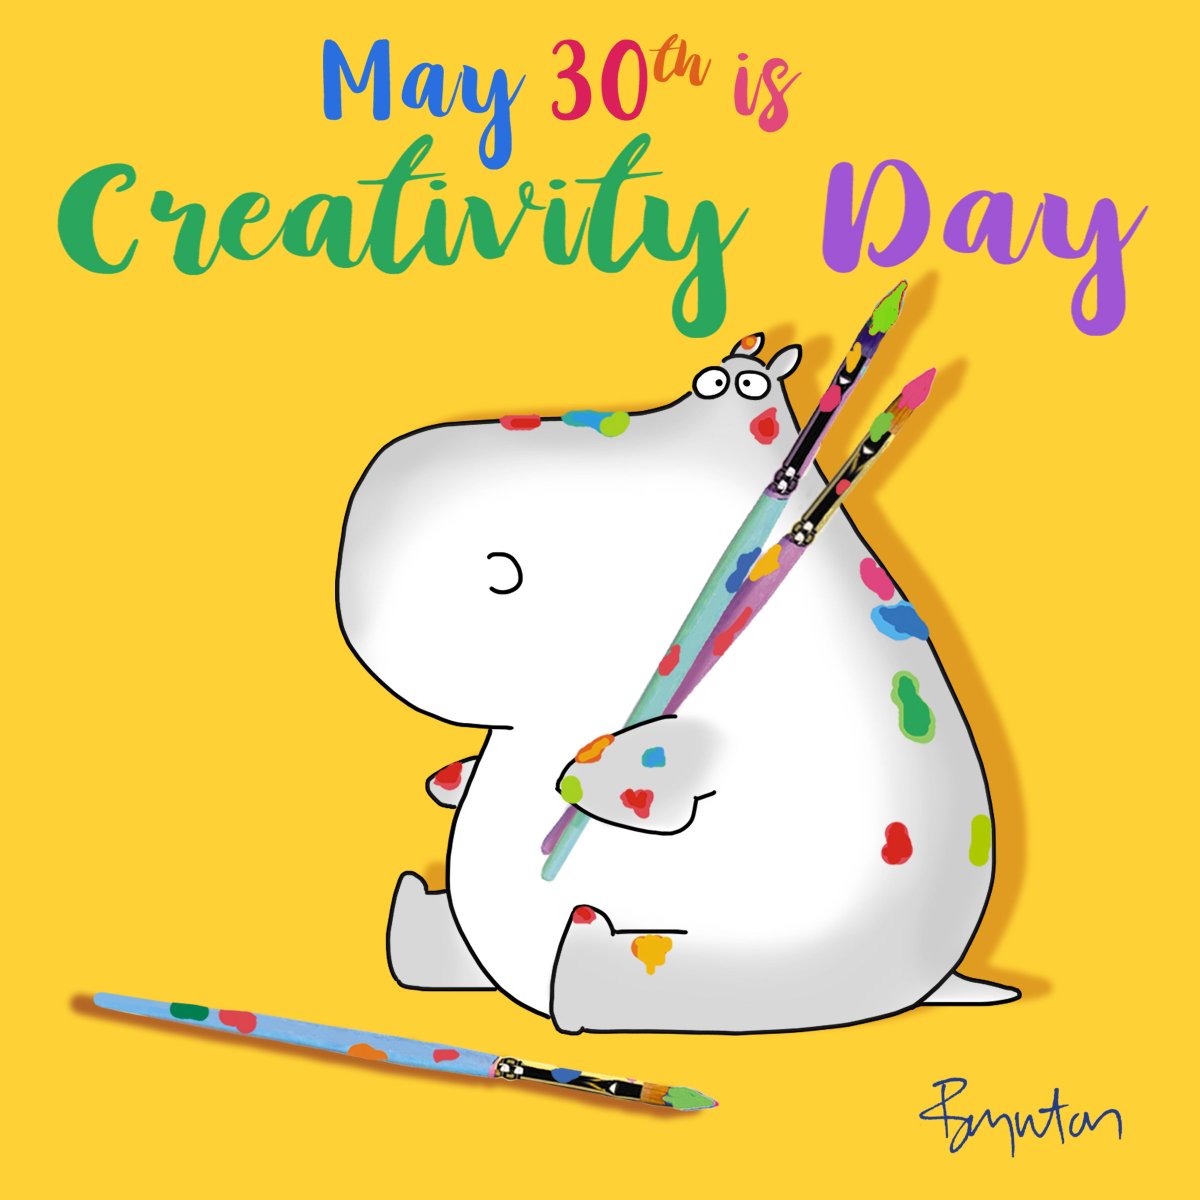 Draw something or paint something or build something or bake something or knit something or invent something or sing or dance or play or write or simply dream. #CreativityDay